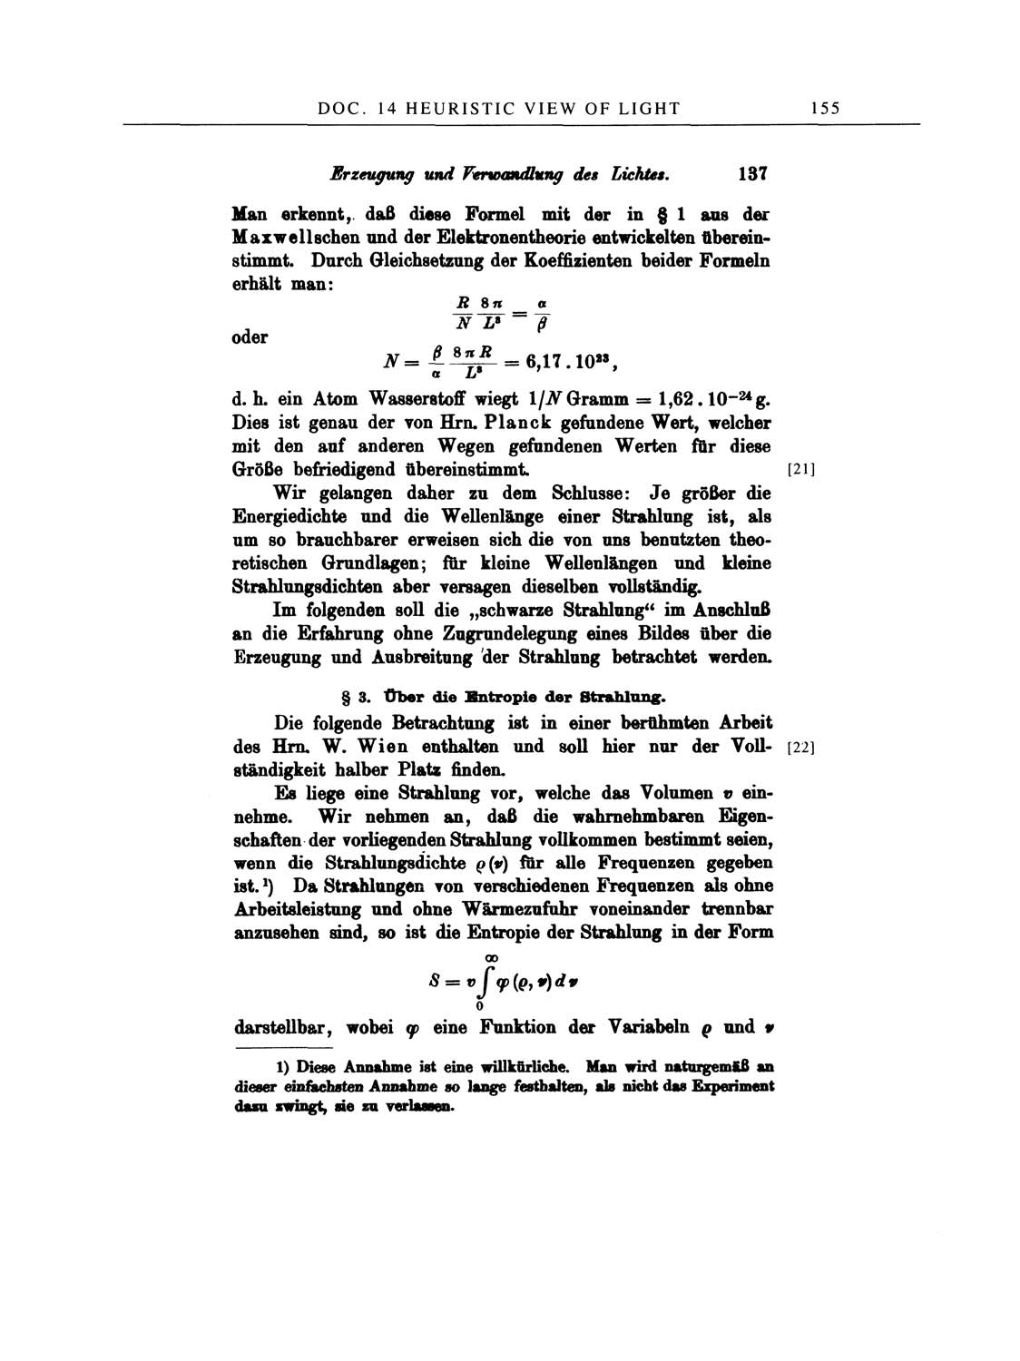 Volume 2: The Swiss Years: Writings, 1900-1909 page 155